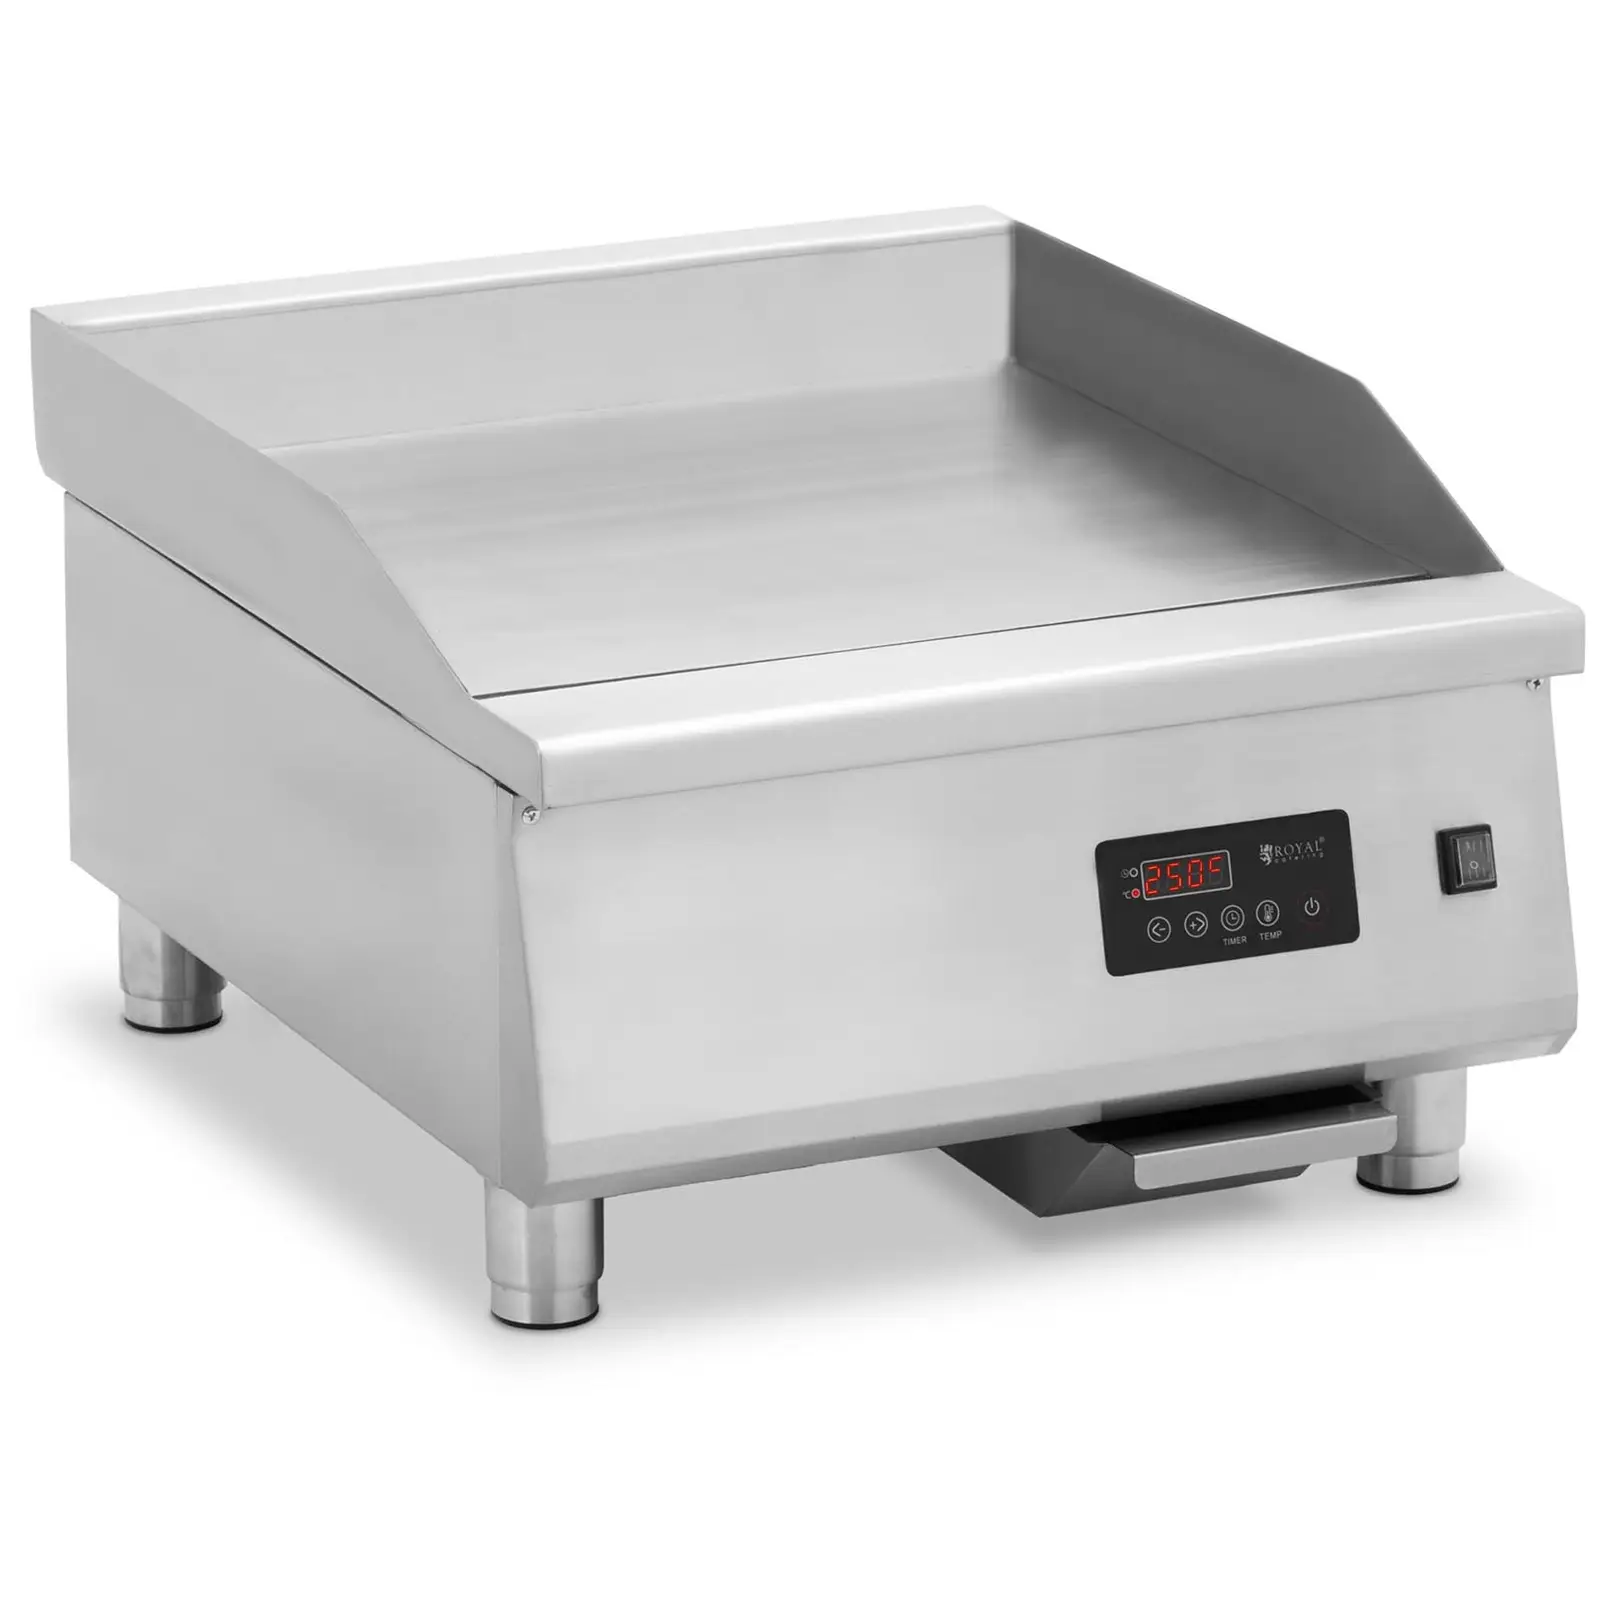 Grill de contact - 600 x 520 mm - lisse - 6000 W - Royal Catering